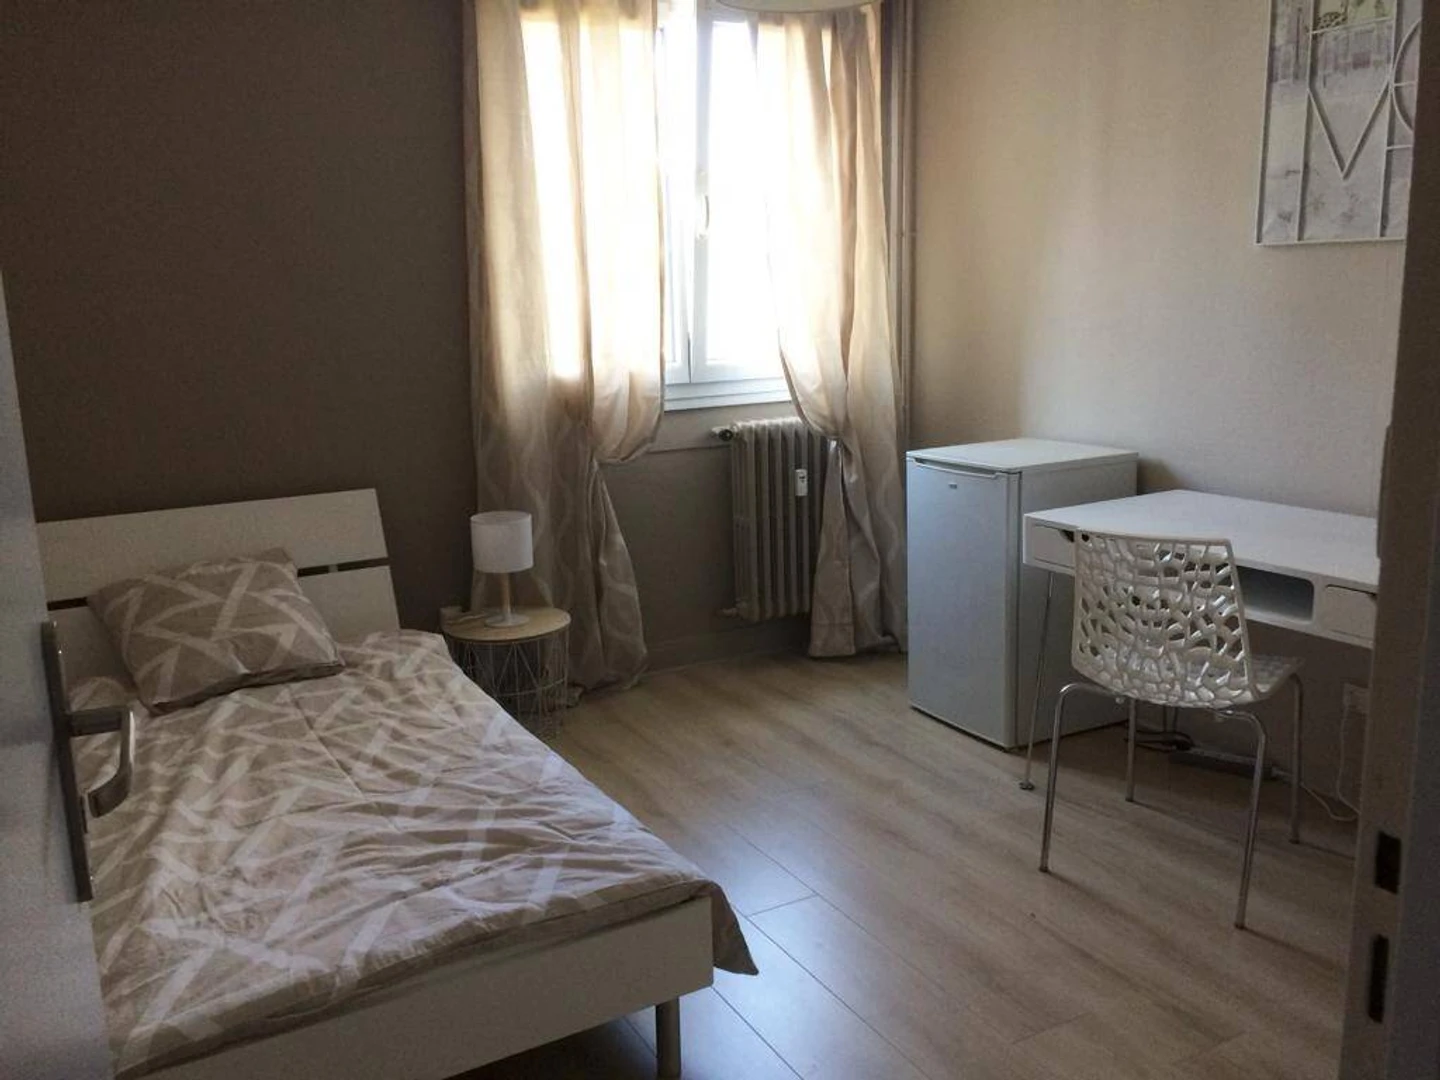 Room for rent with double bed Besançon